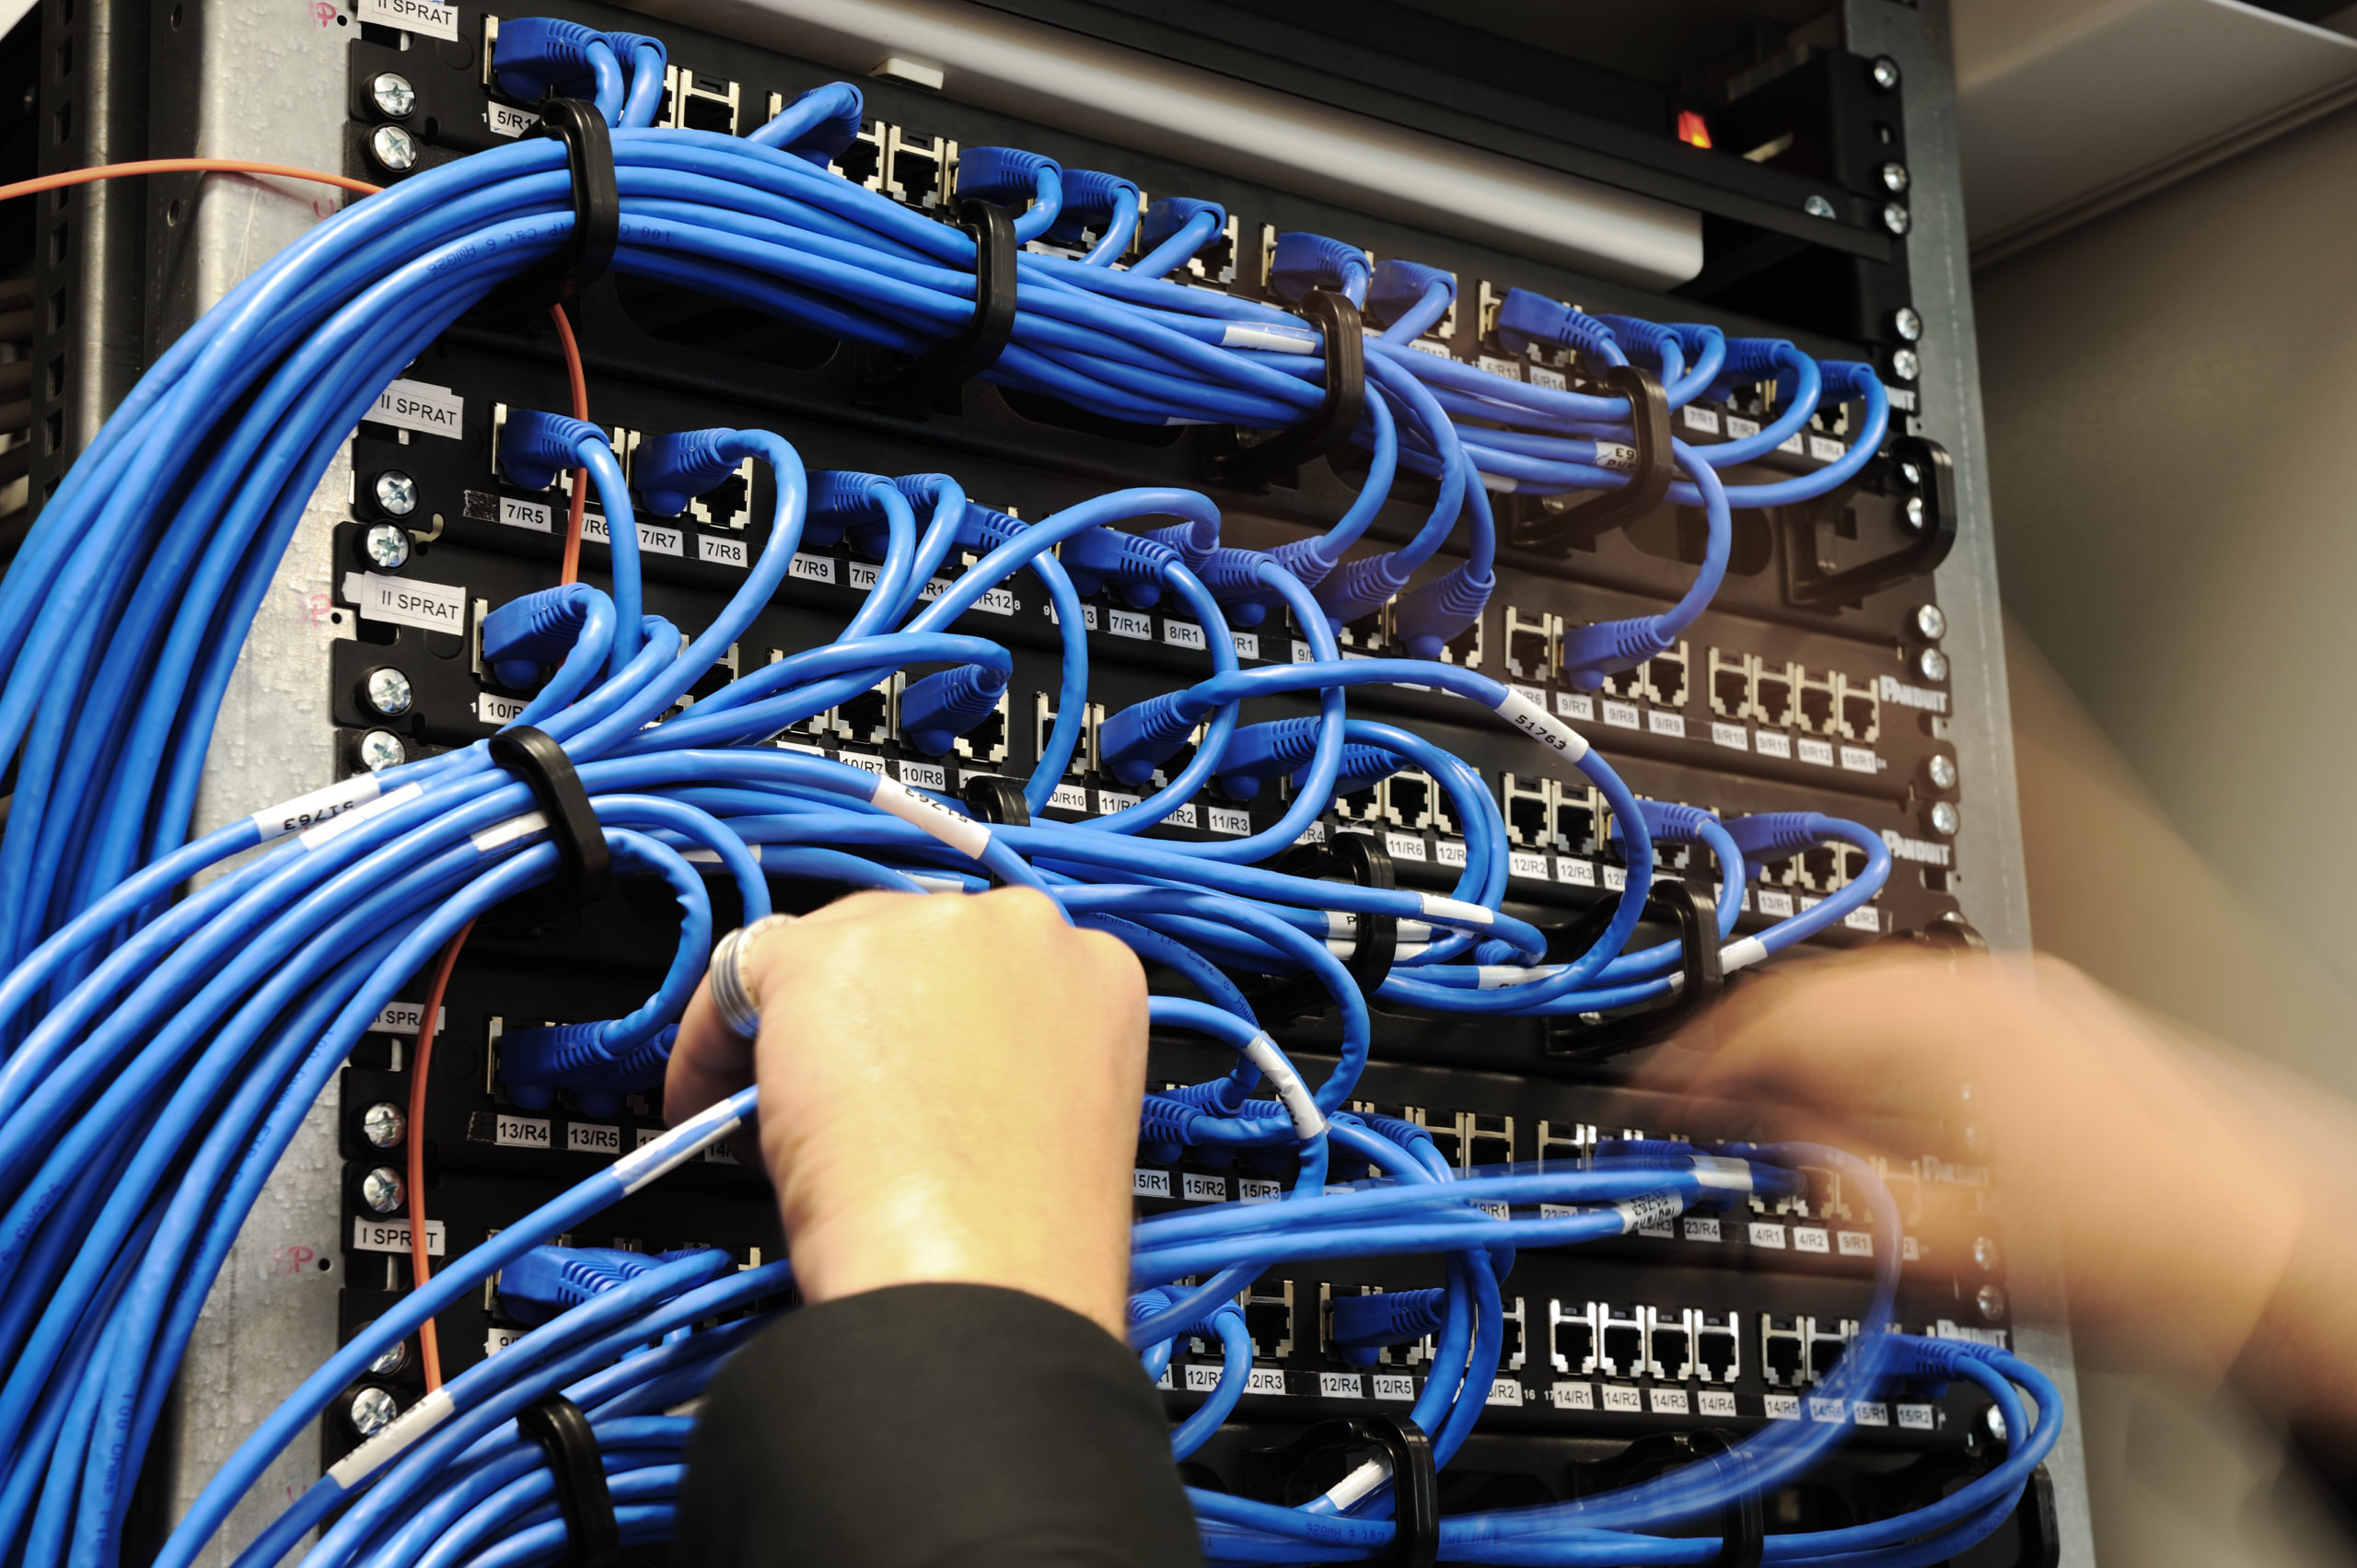 What Are the Benefits of Structured Cabling?